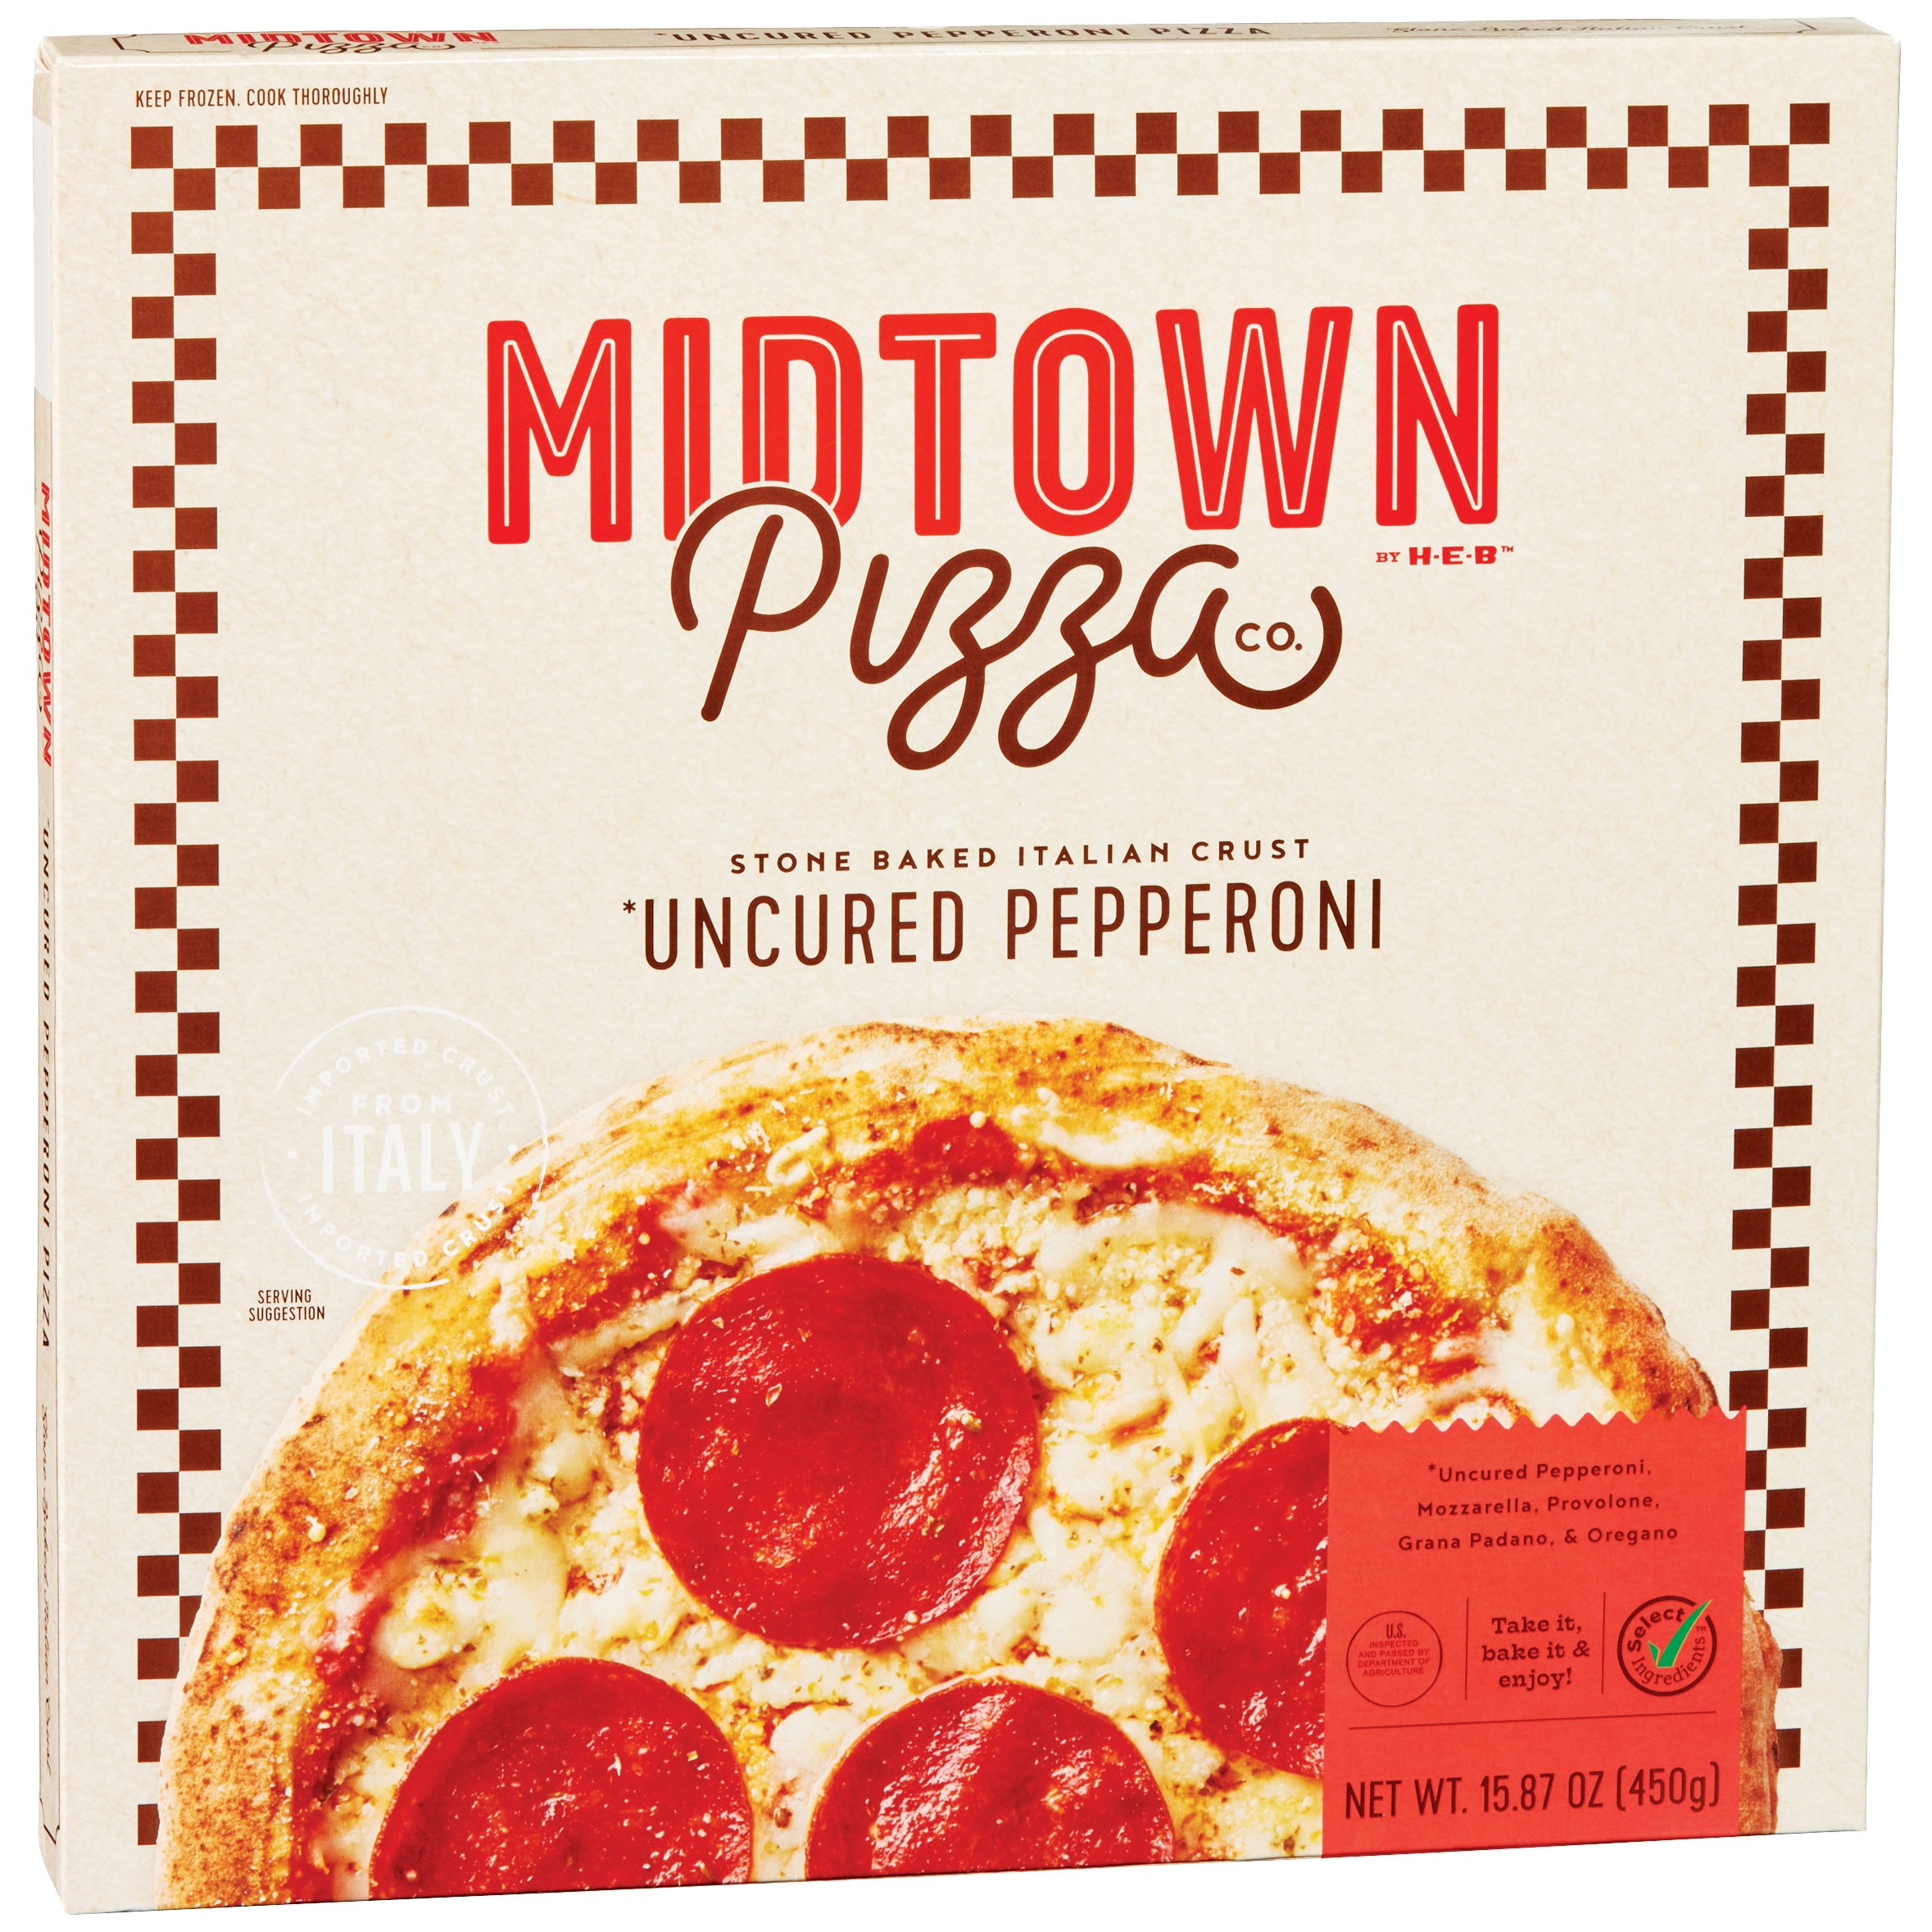 Midtown Pizza Co. by H-E-B Frozen Pizza - Uncured Pepperoni - Shop Pizza at H-E-B